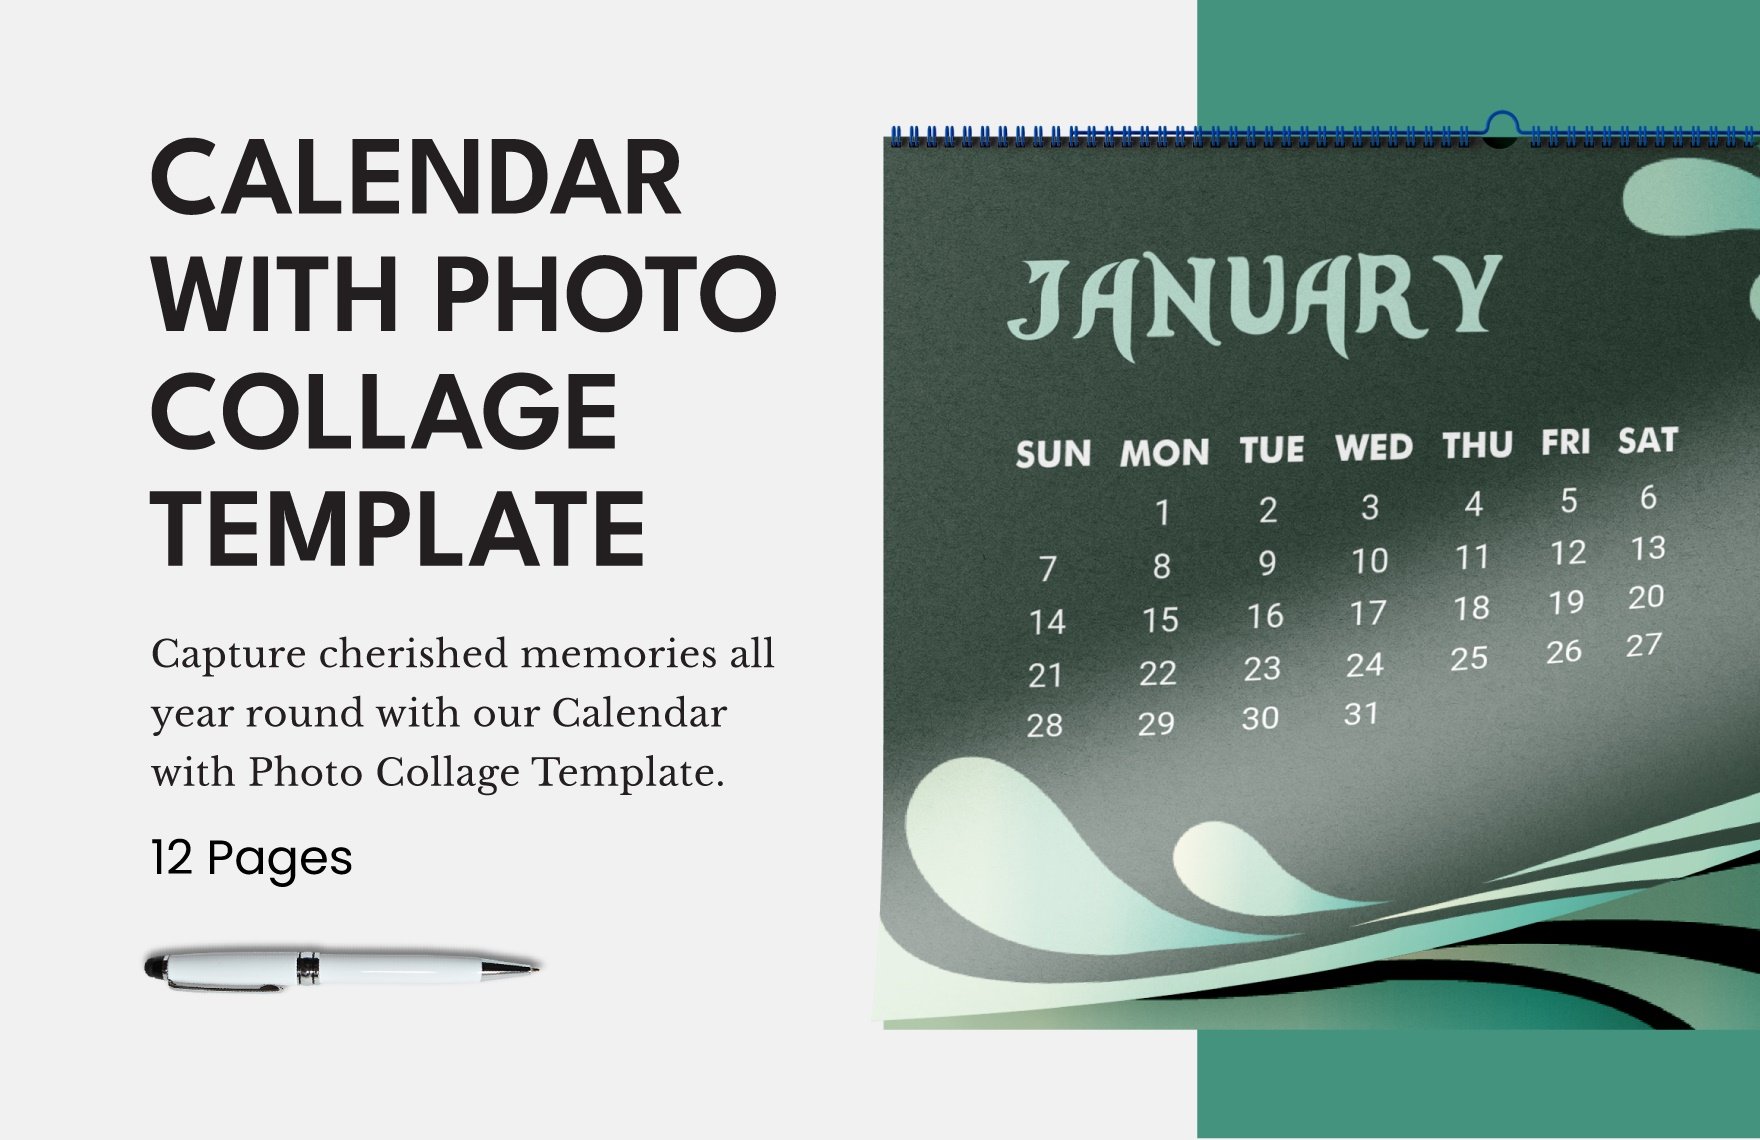 Calendar with Photo Collage Template